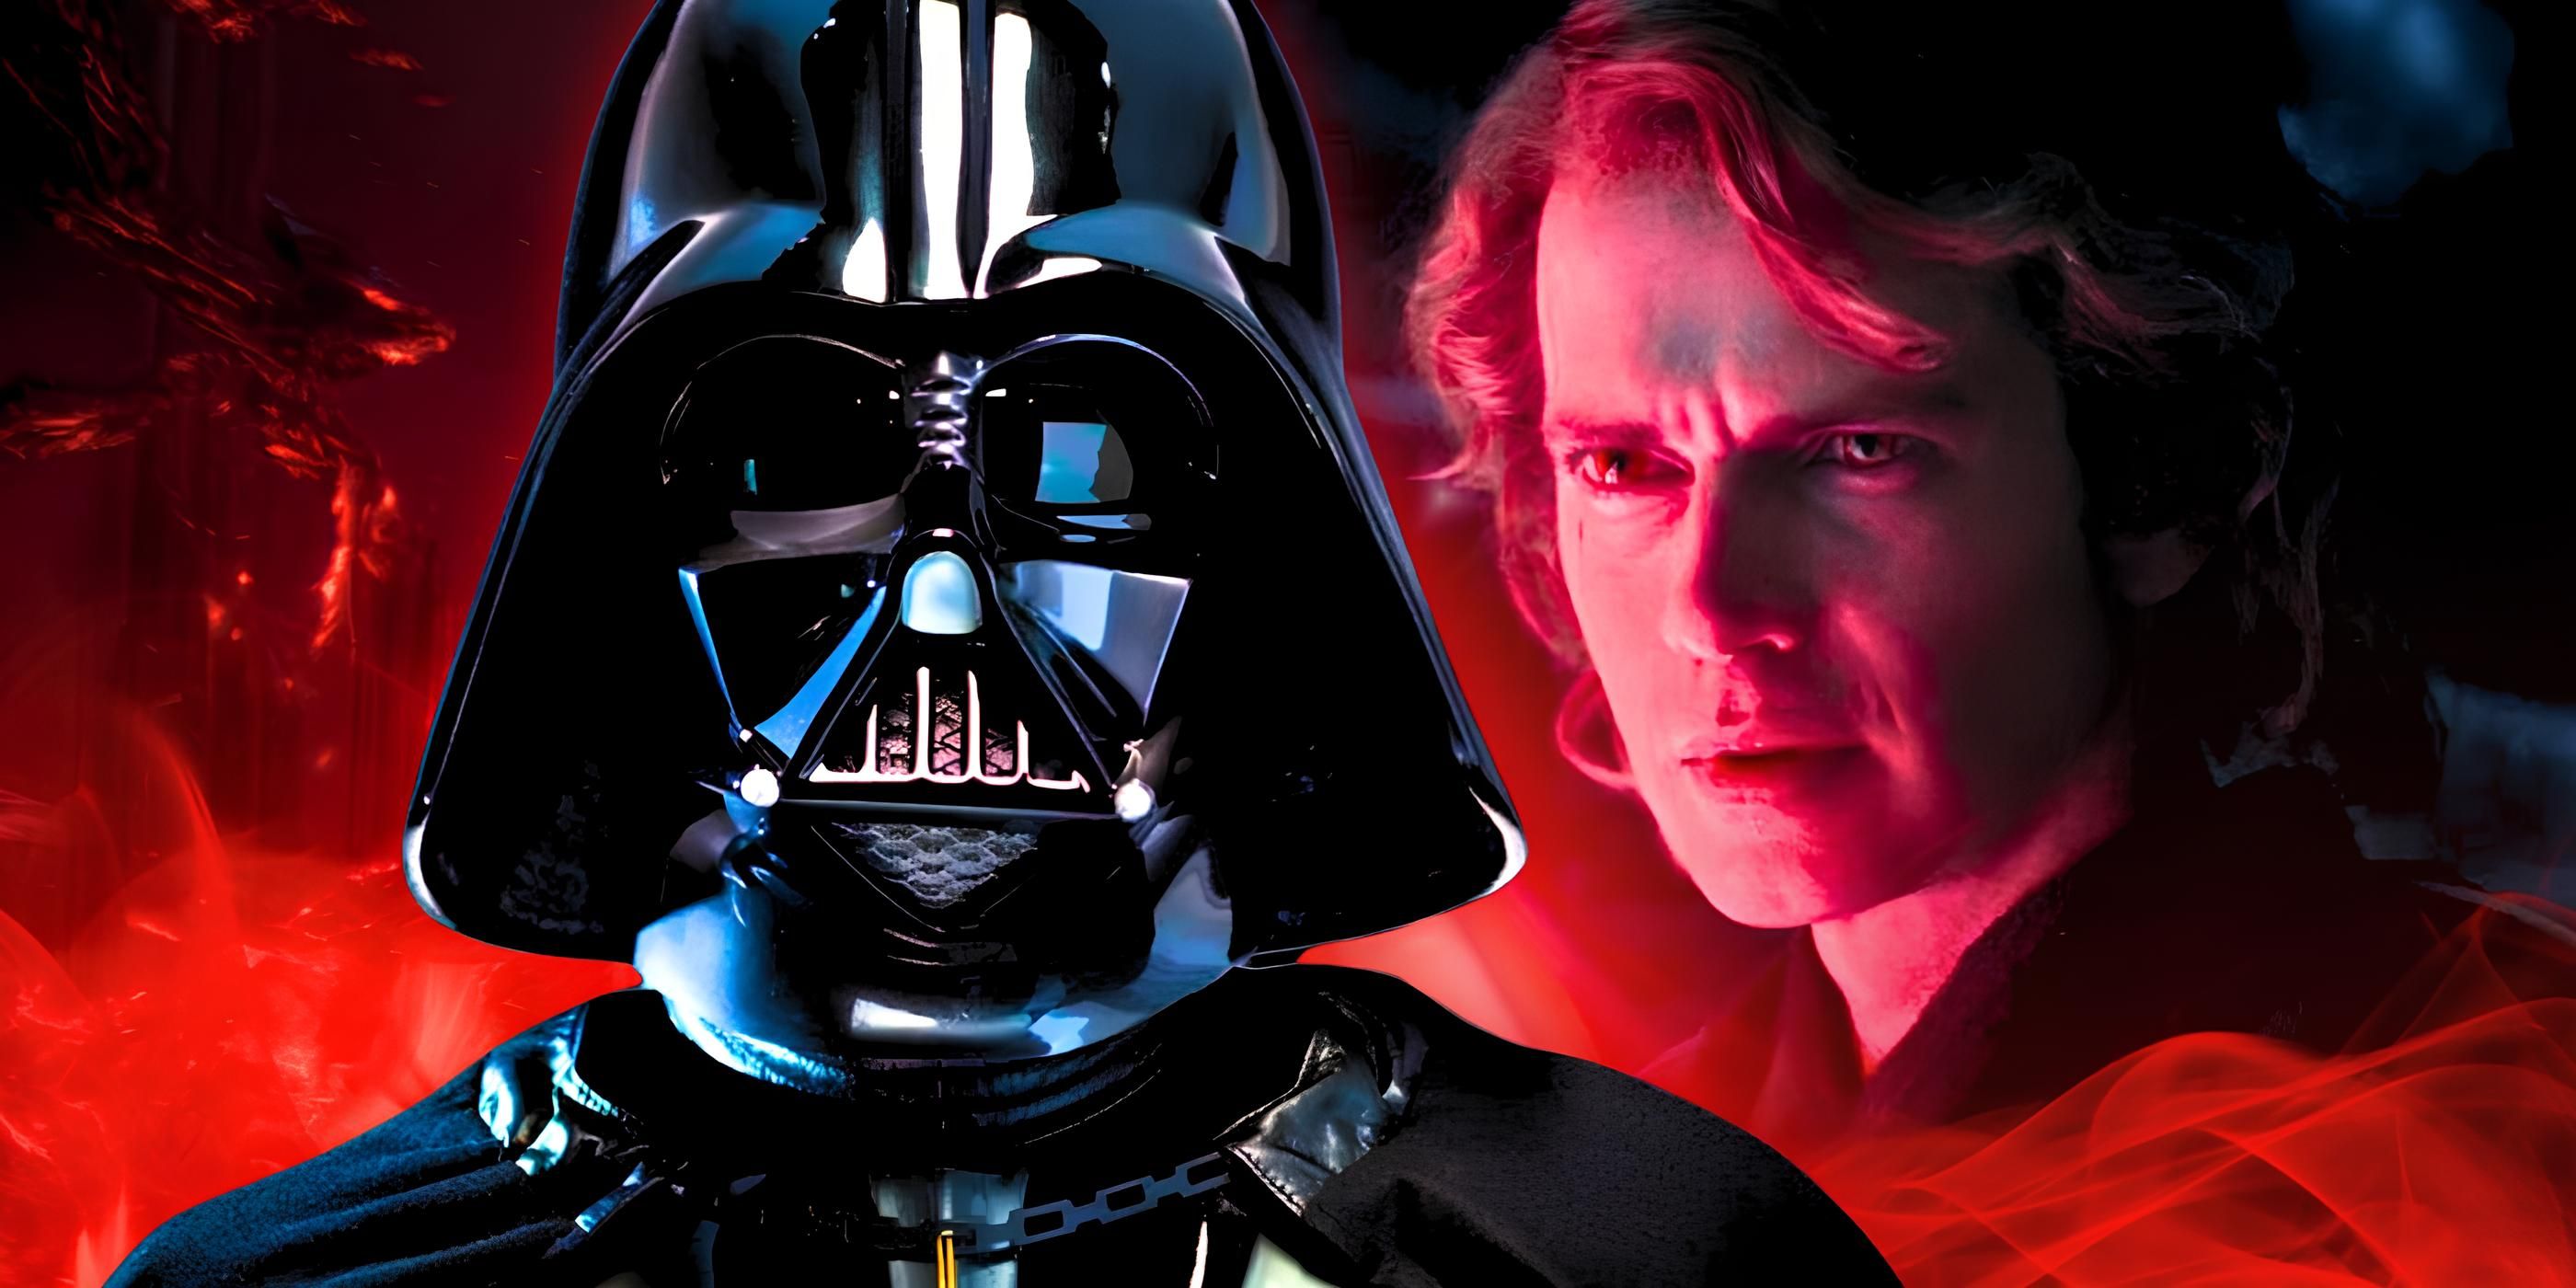 Darth Vader in his helmet to the left and Anakin Skywalker from the Ahsoka show to the right in a combined image with a red background